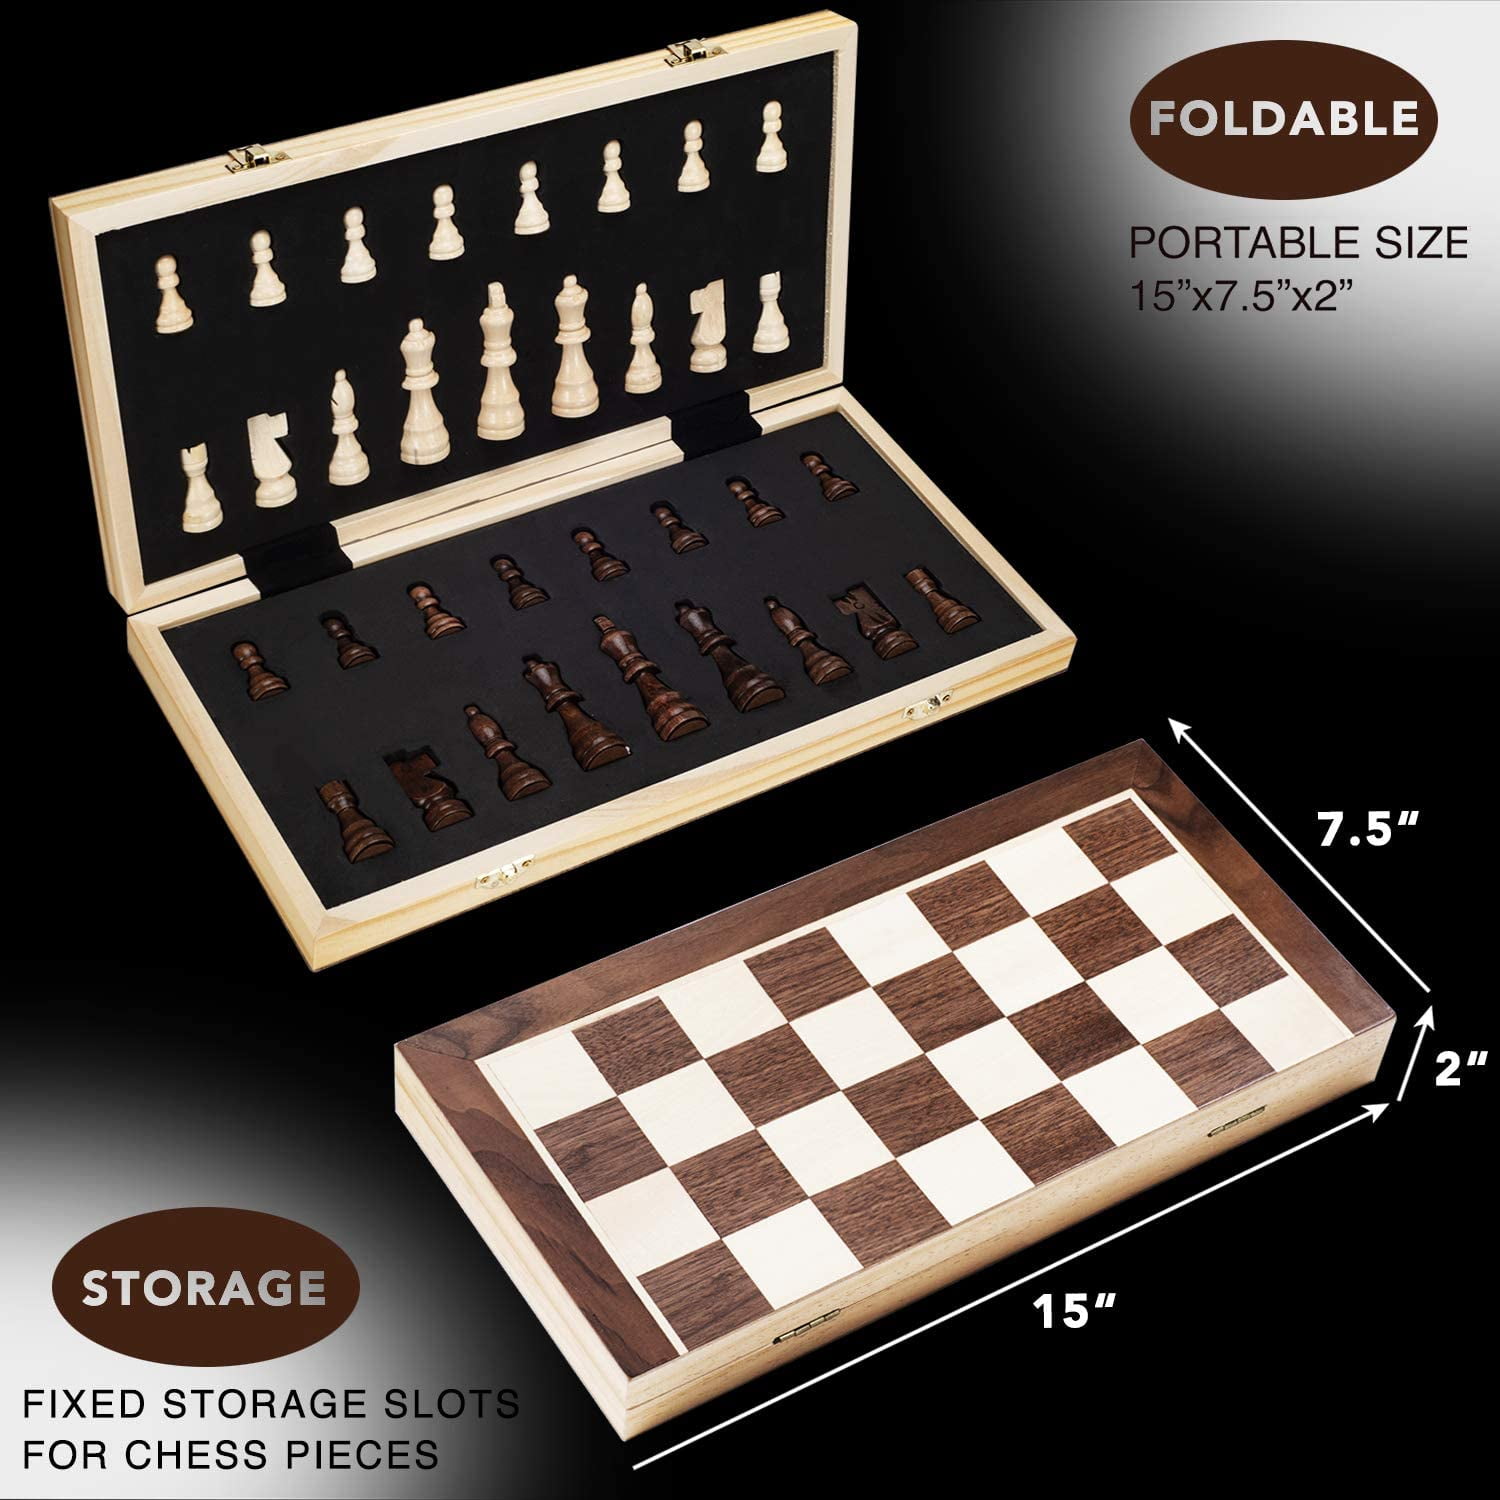 LEAP Wooden Chess Set 17 Inches - 2 Extra Queens - Folding Board, Handmade  Portable Travel Chess Board Game Sets with Game Pieces Storage Slots - All